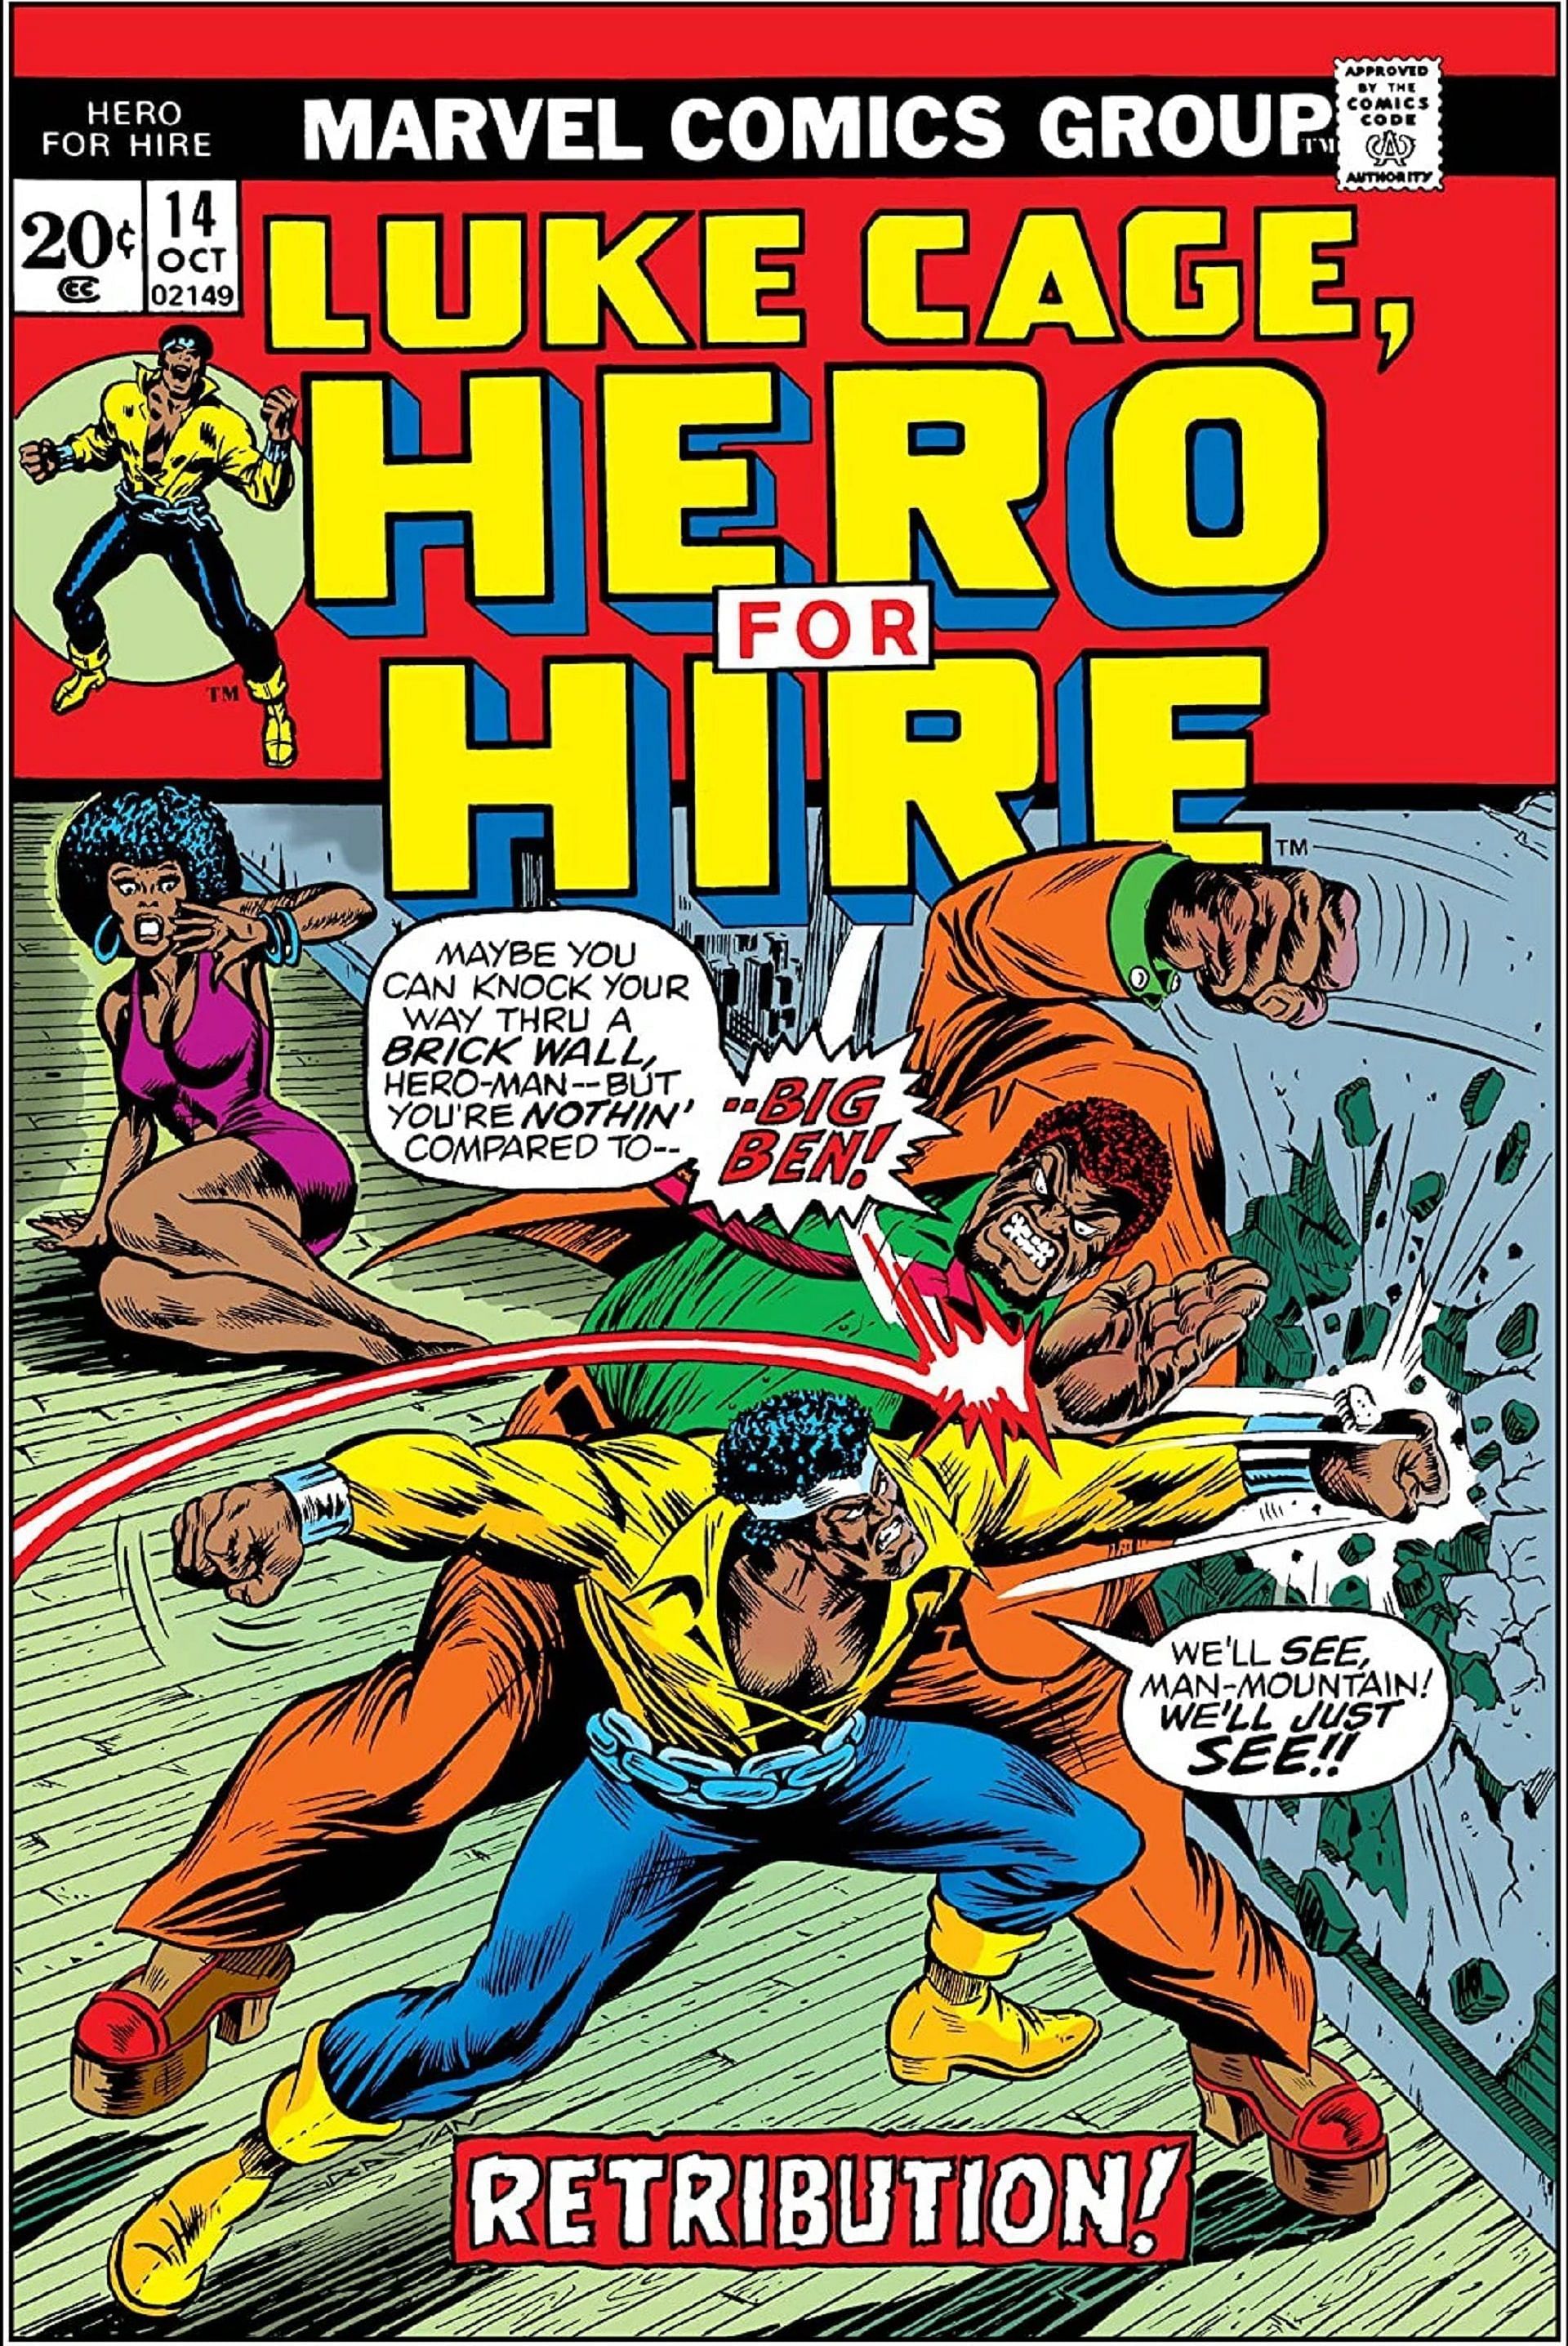 Hero for Hire features Luke Cage (Image via Marvel)